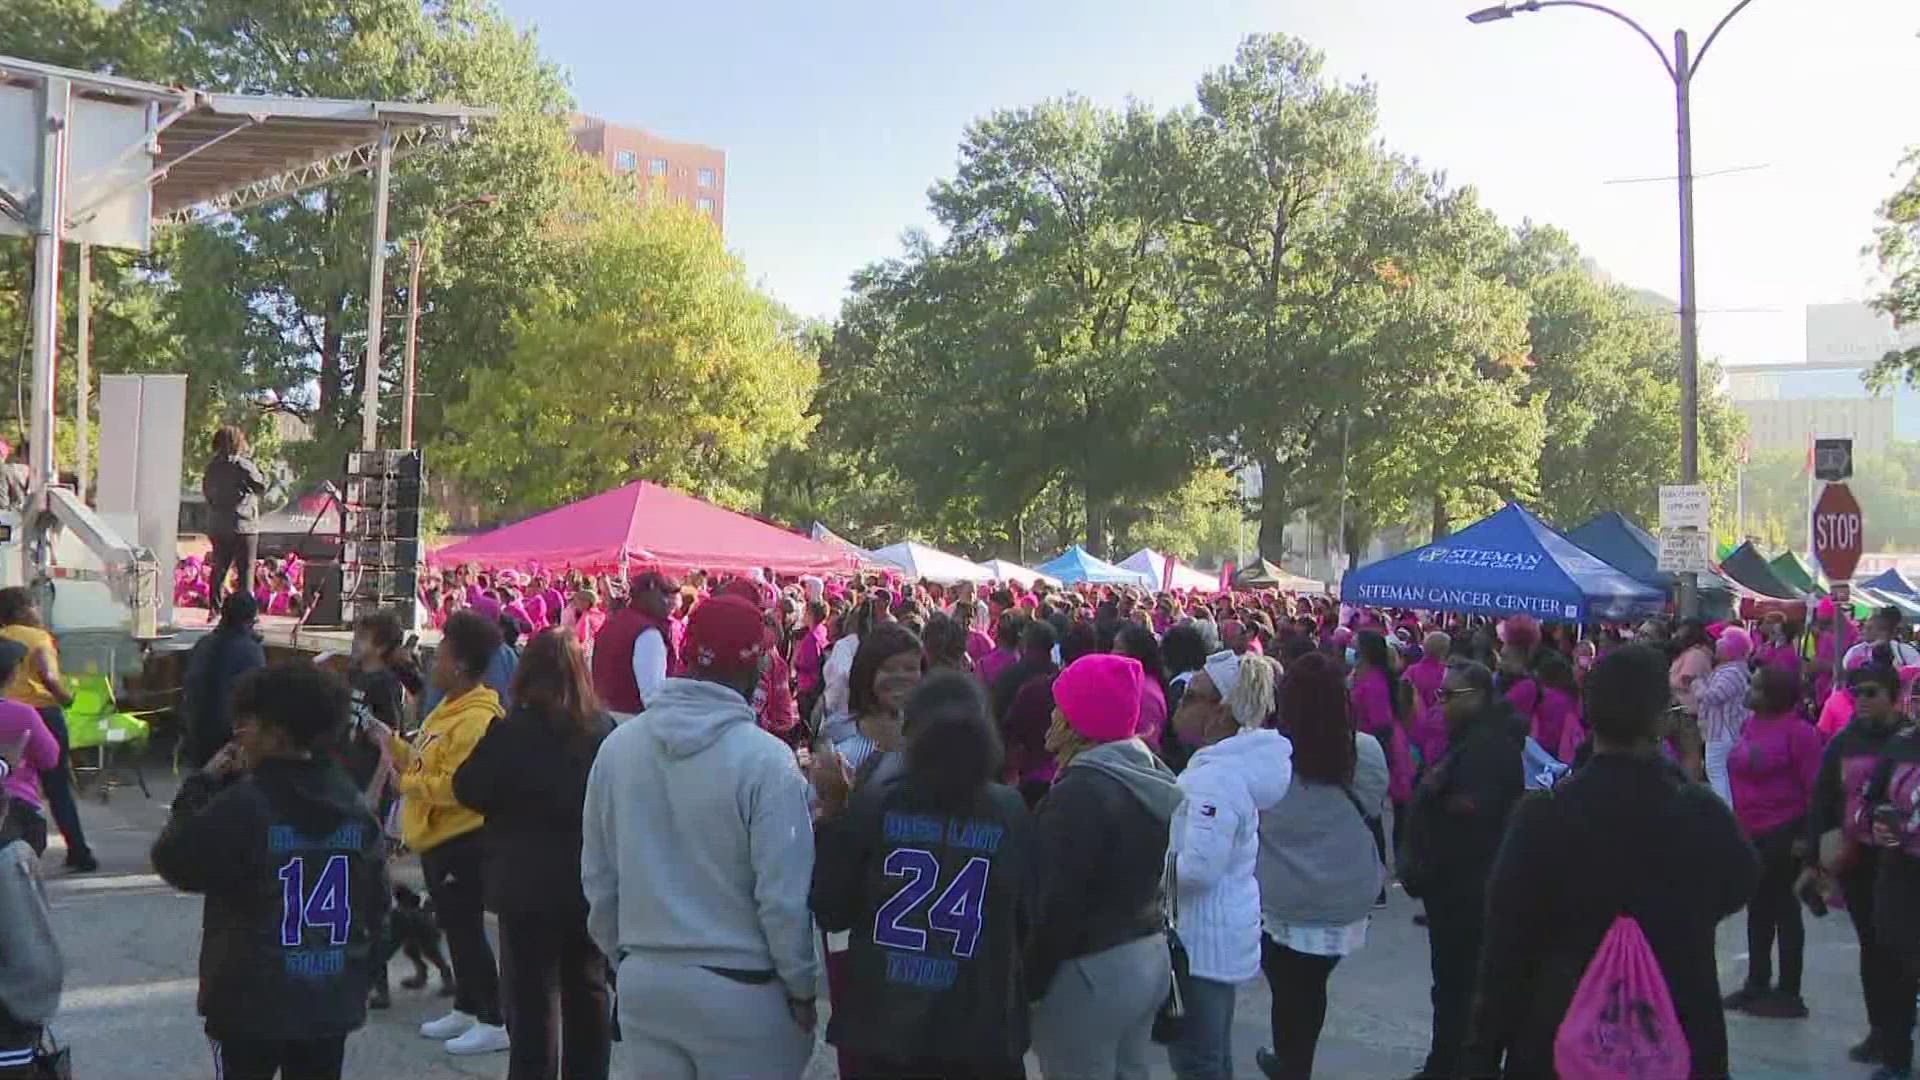 The purpose of the walk and car parade is to raise awareness about issues of breast cancer in women of color. Every year the walk is held in several U.S. cities.